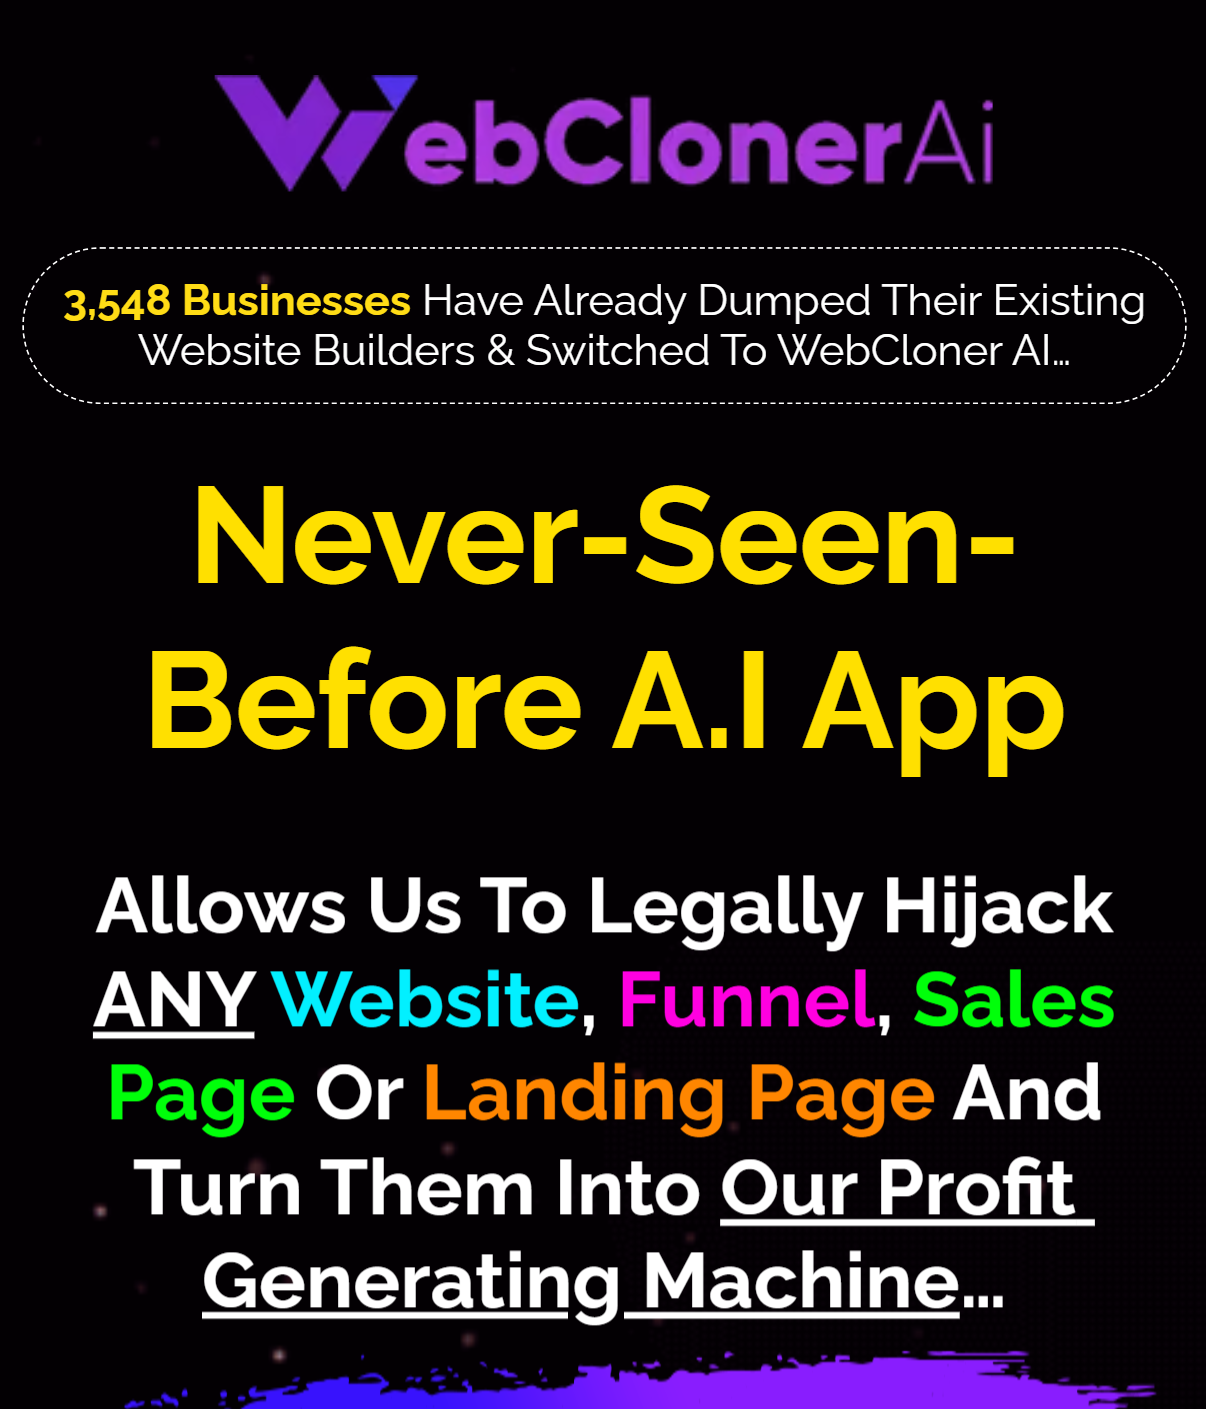 WebClonerAI WebClonerAI Review: The Perfect Solution for Online Business Owners for Creating Profitable Websites by Using AI To Clone Competitor's Websites Ethically